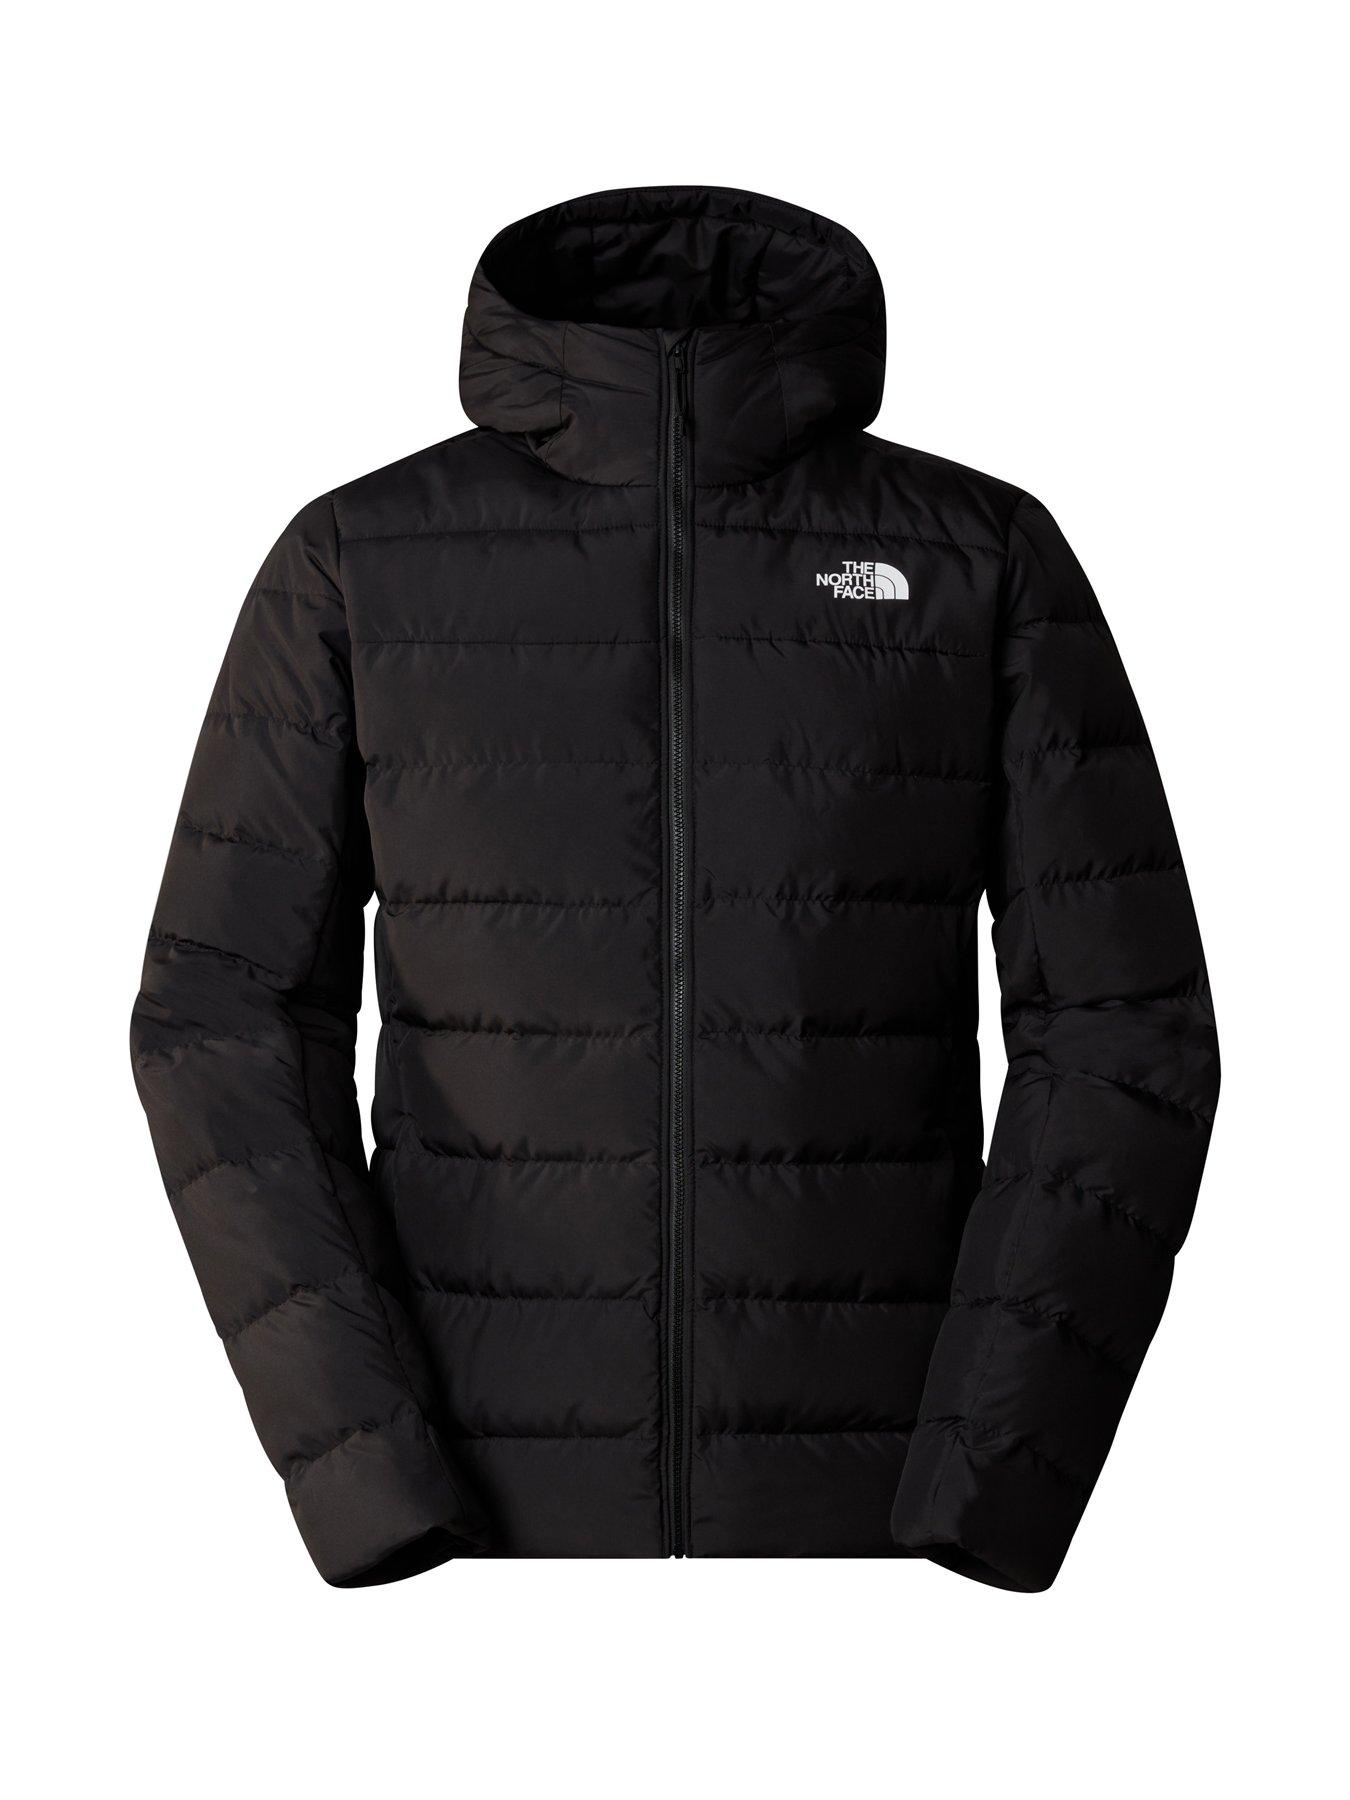 NORTH FACE UK Online | Very.co.uk